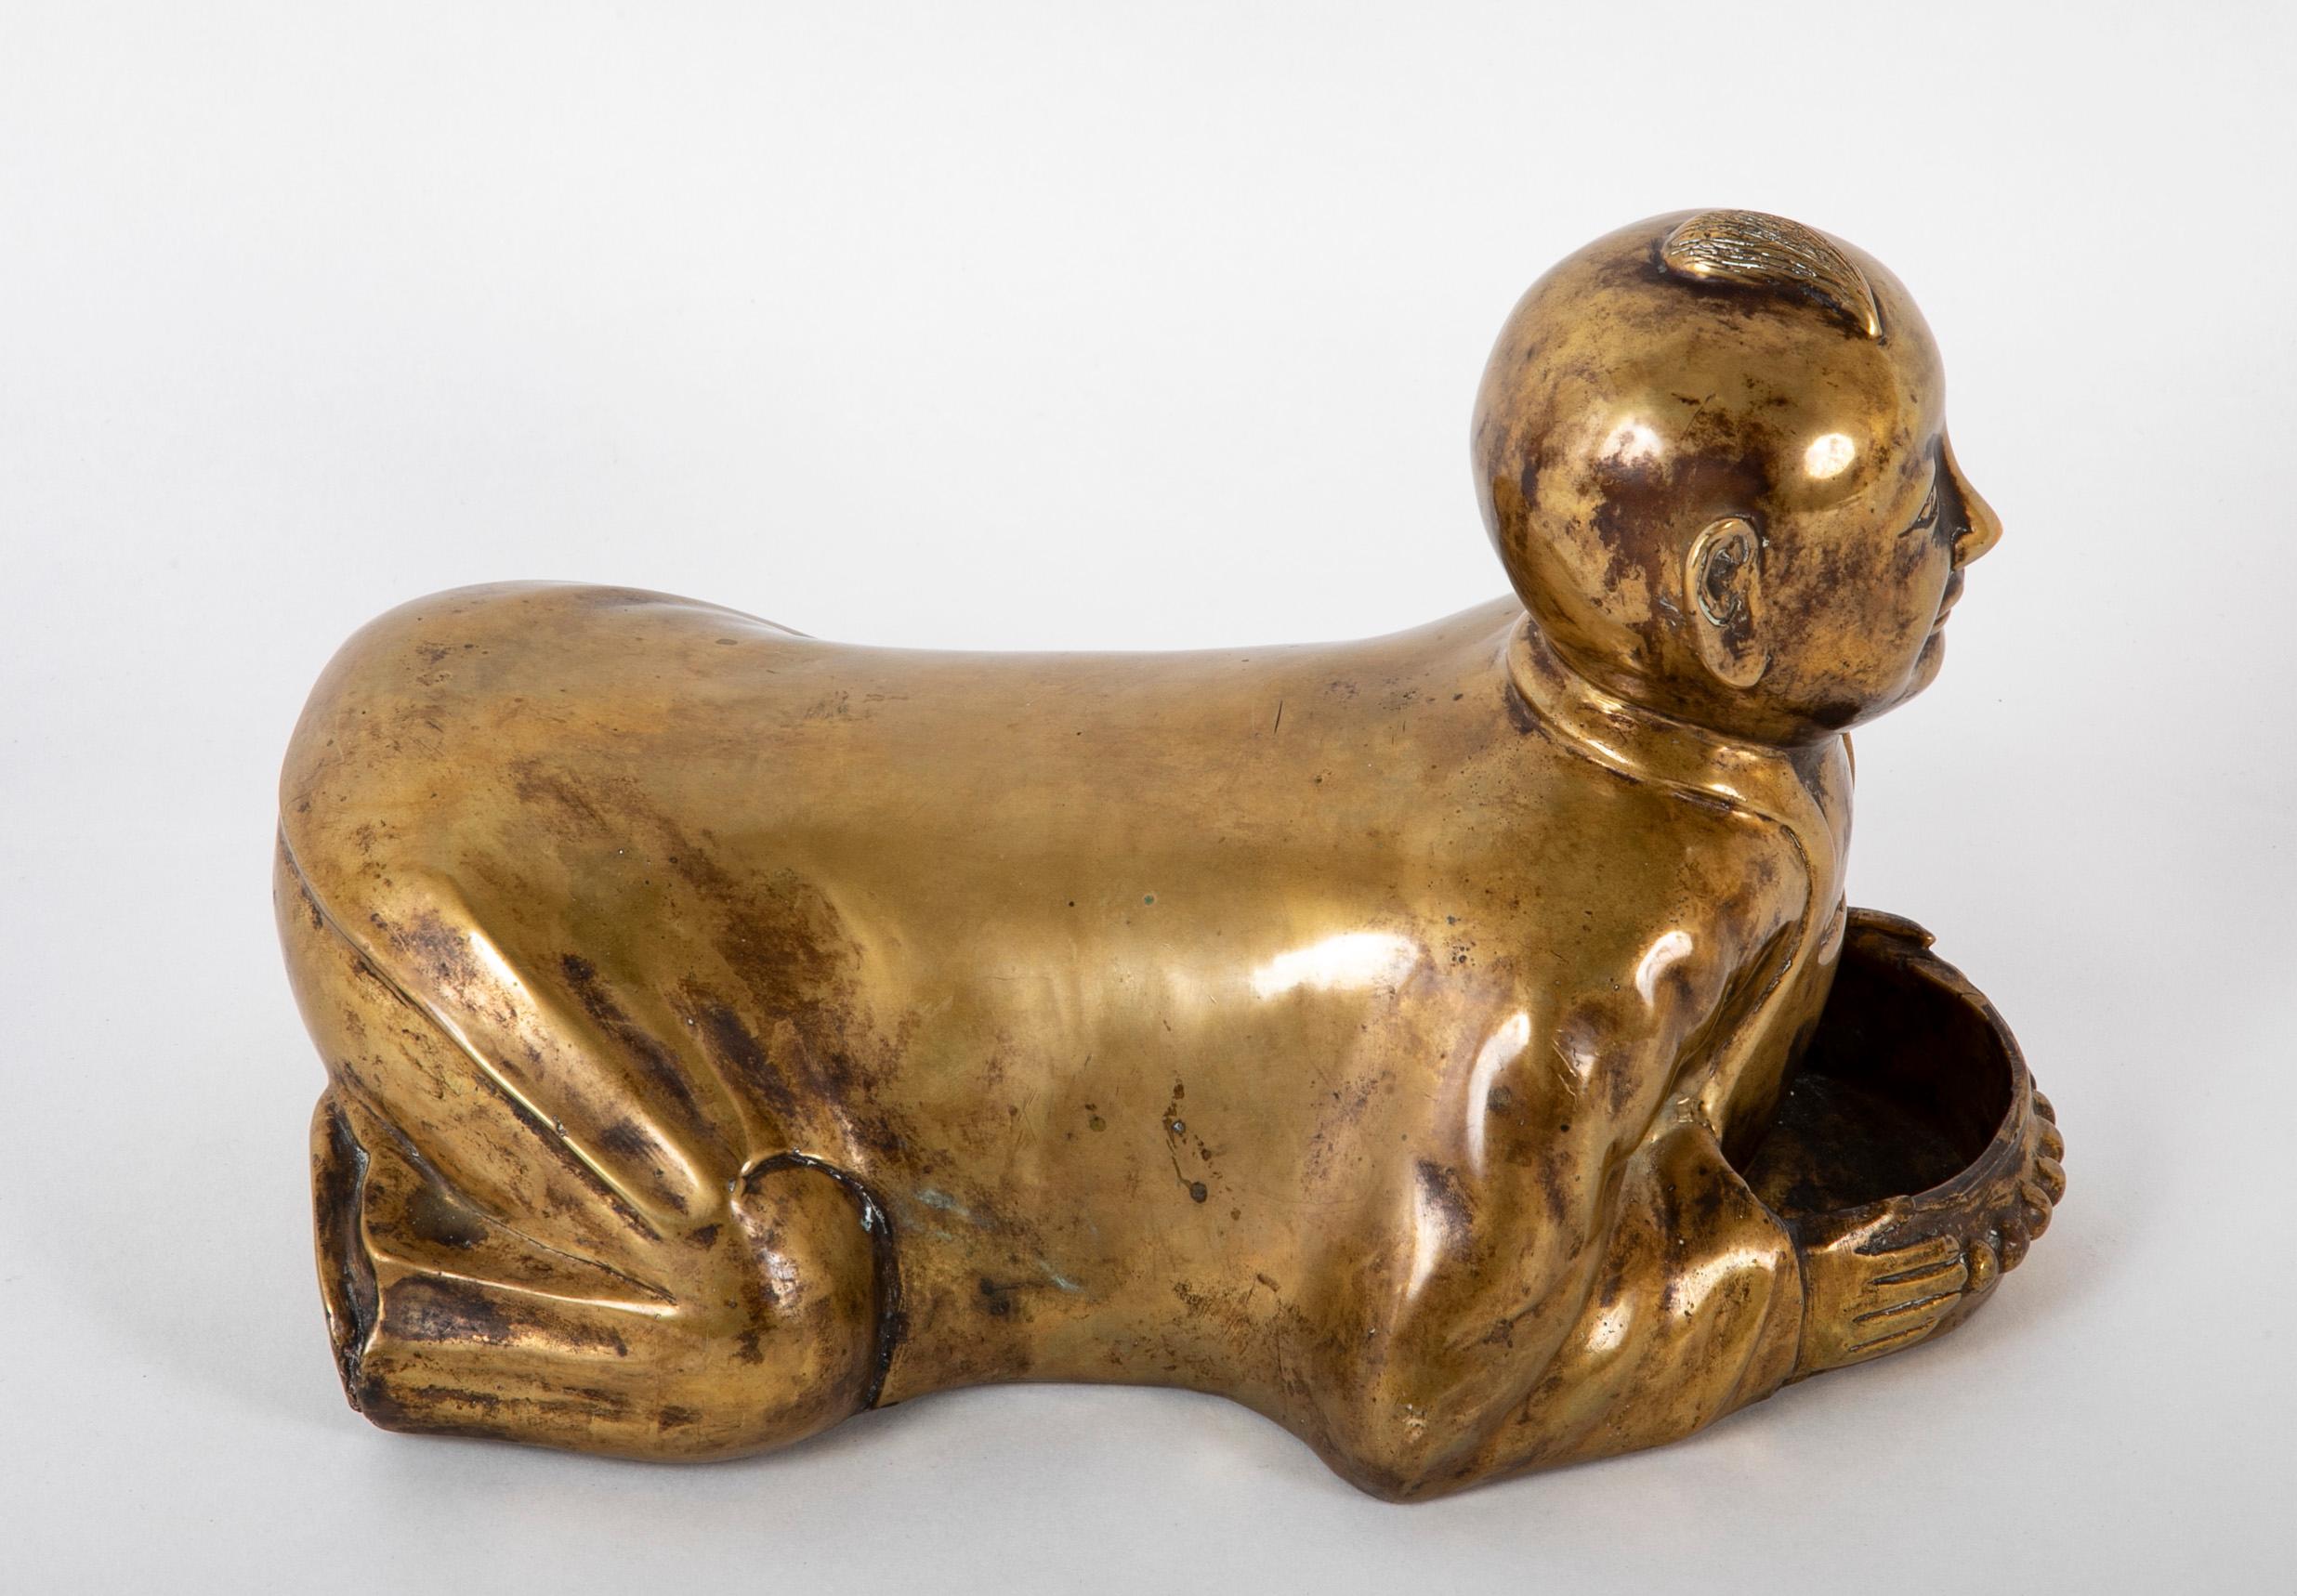 Whimsical circa 1900 Chinese brass opium pillow in the form of a kneeling boy. The boy shown crouching and smiling with an amusing forelock on his otherwise bald head. He holds in his hands a tray to rest the opium pipe. Now a wonderful piece of